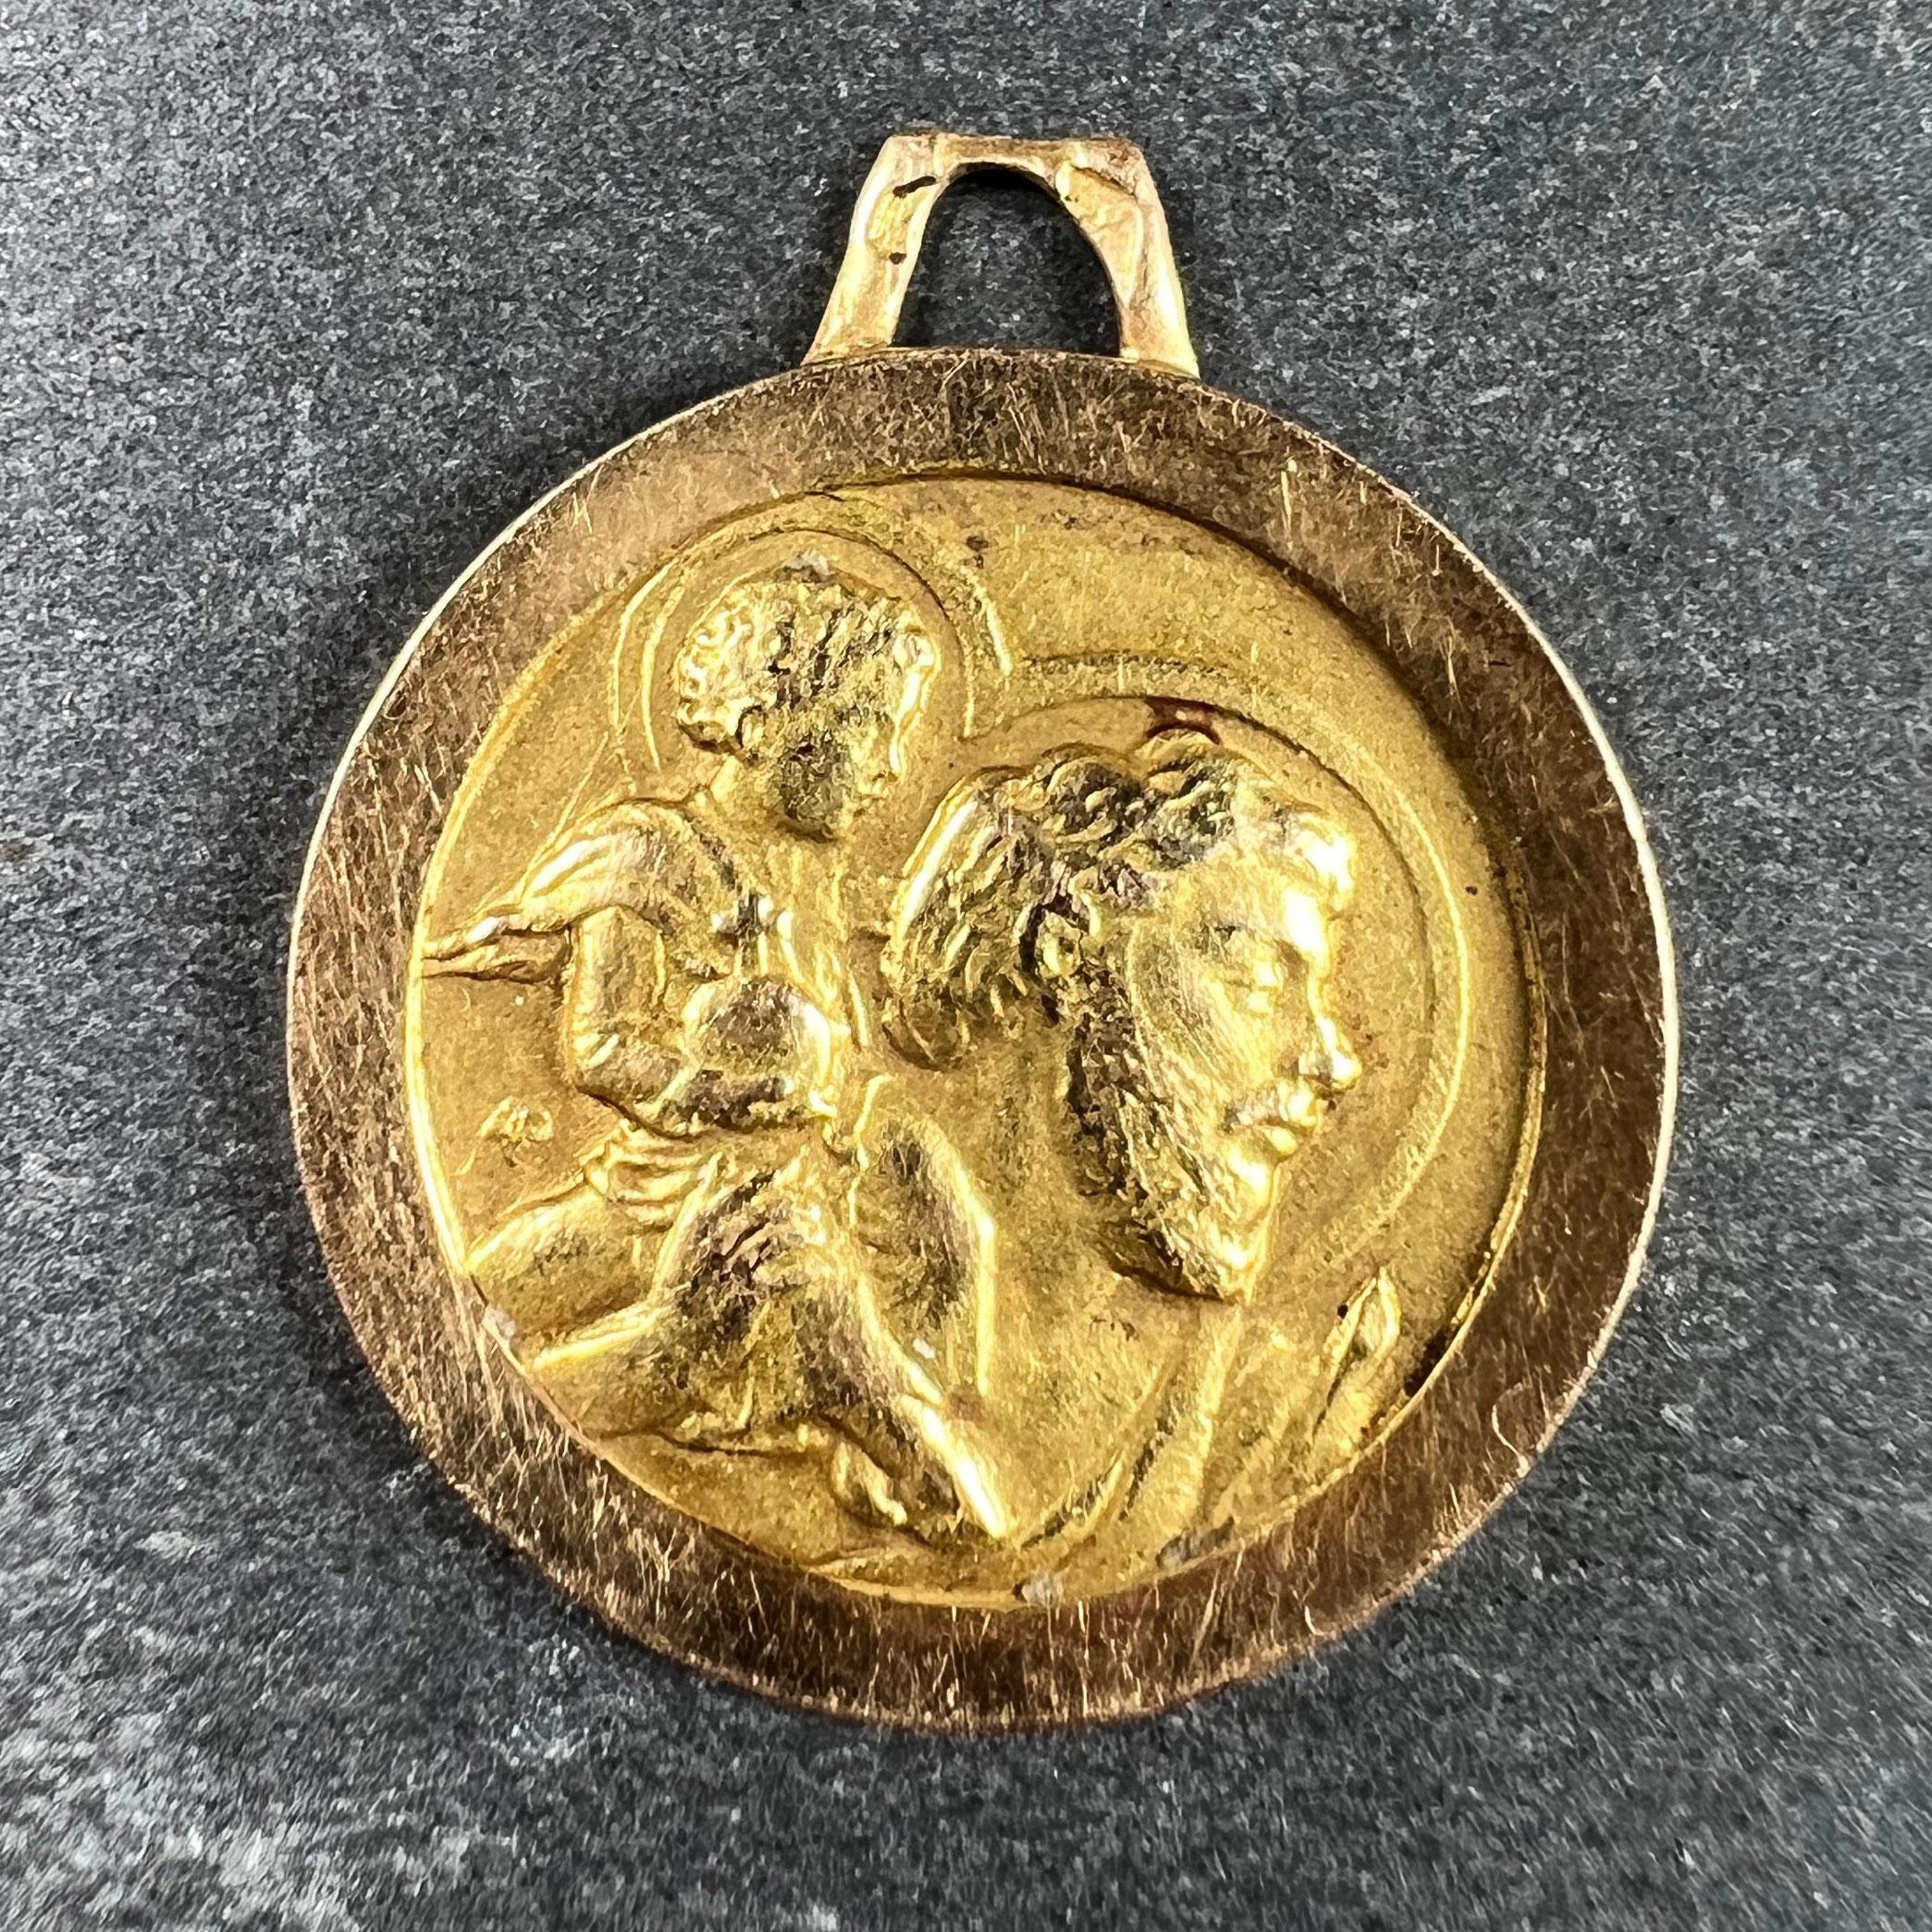 A French 18 karat (18K) yellow gold charm pendant depicting the head of St Christopher as he carries the infant Christ across a river. Stamped with the eagle’s head for French manufacture and 18 karat gold, and an unknown maker’s mark. The sculpted